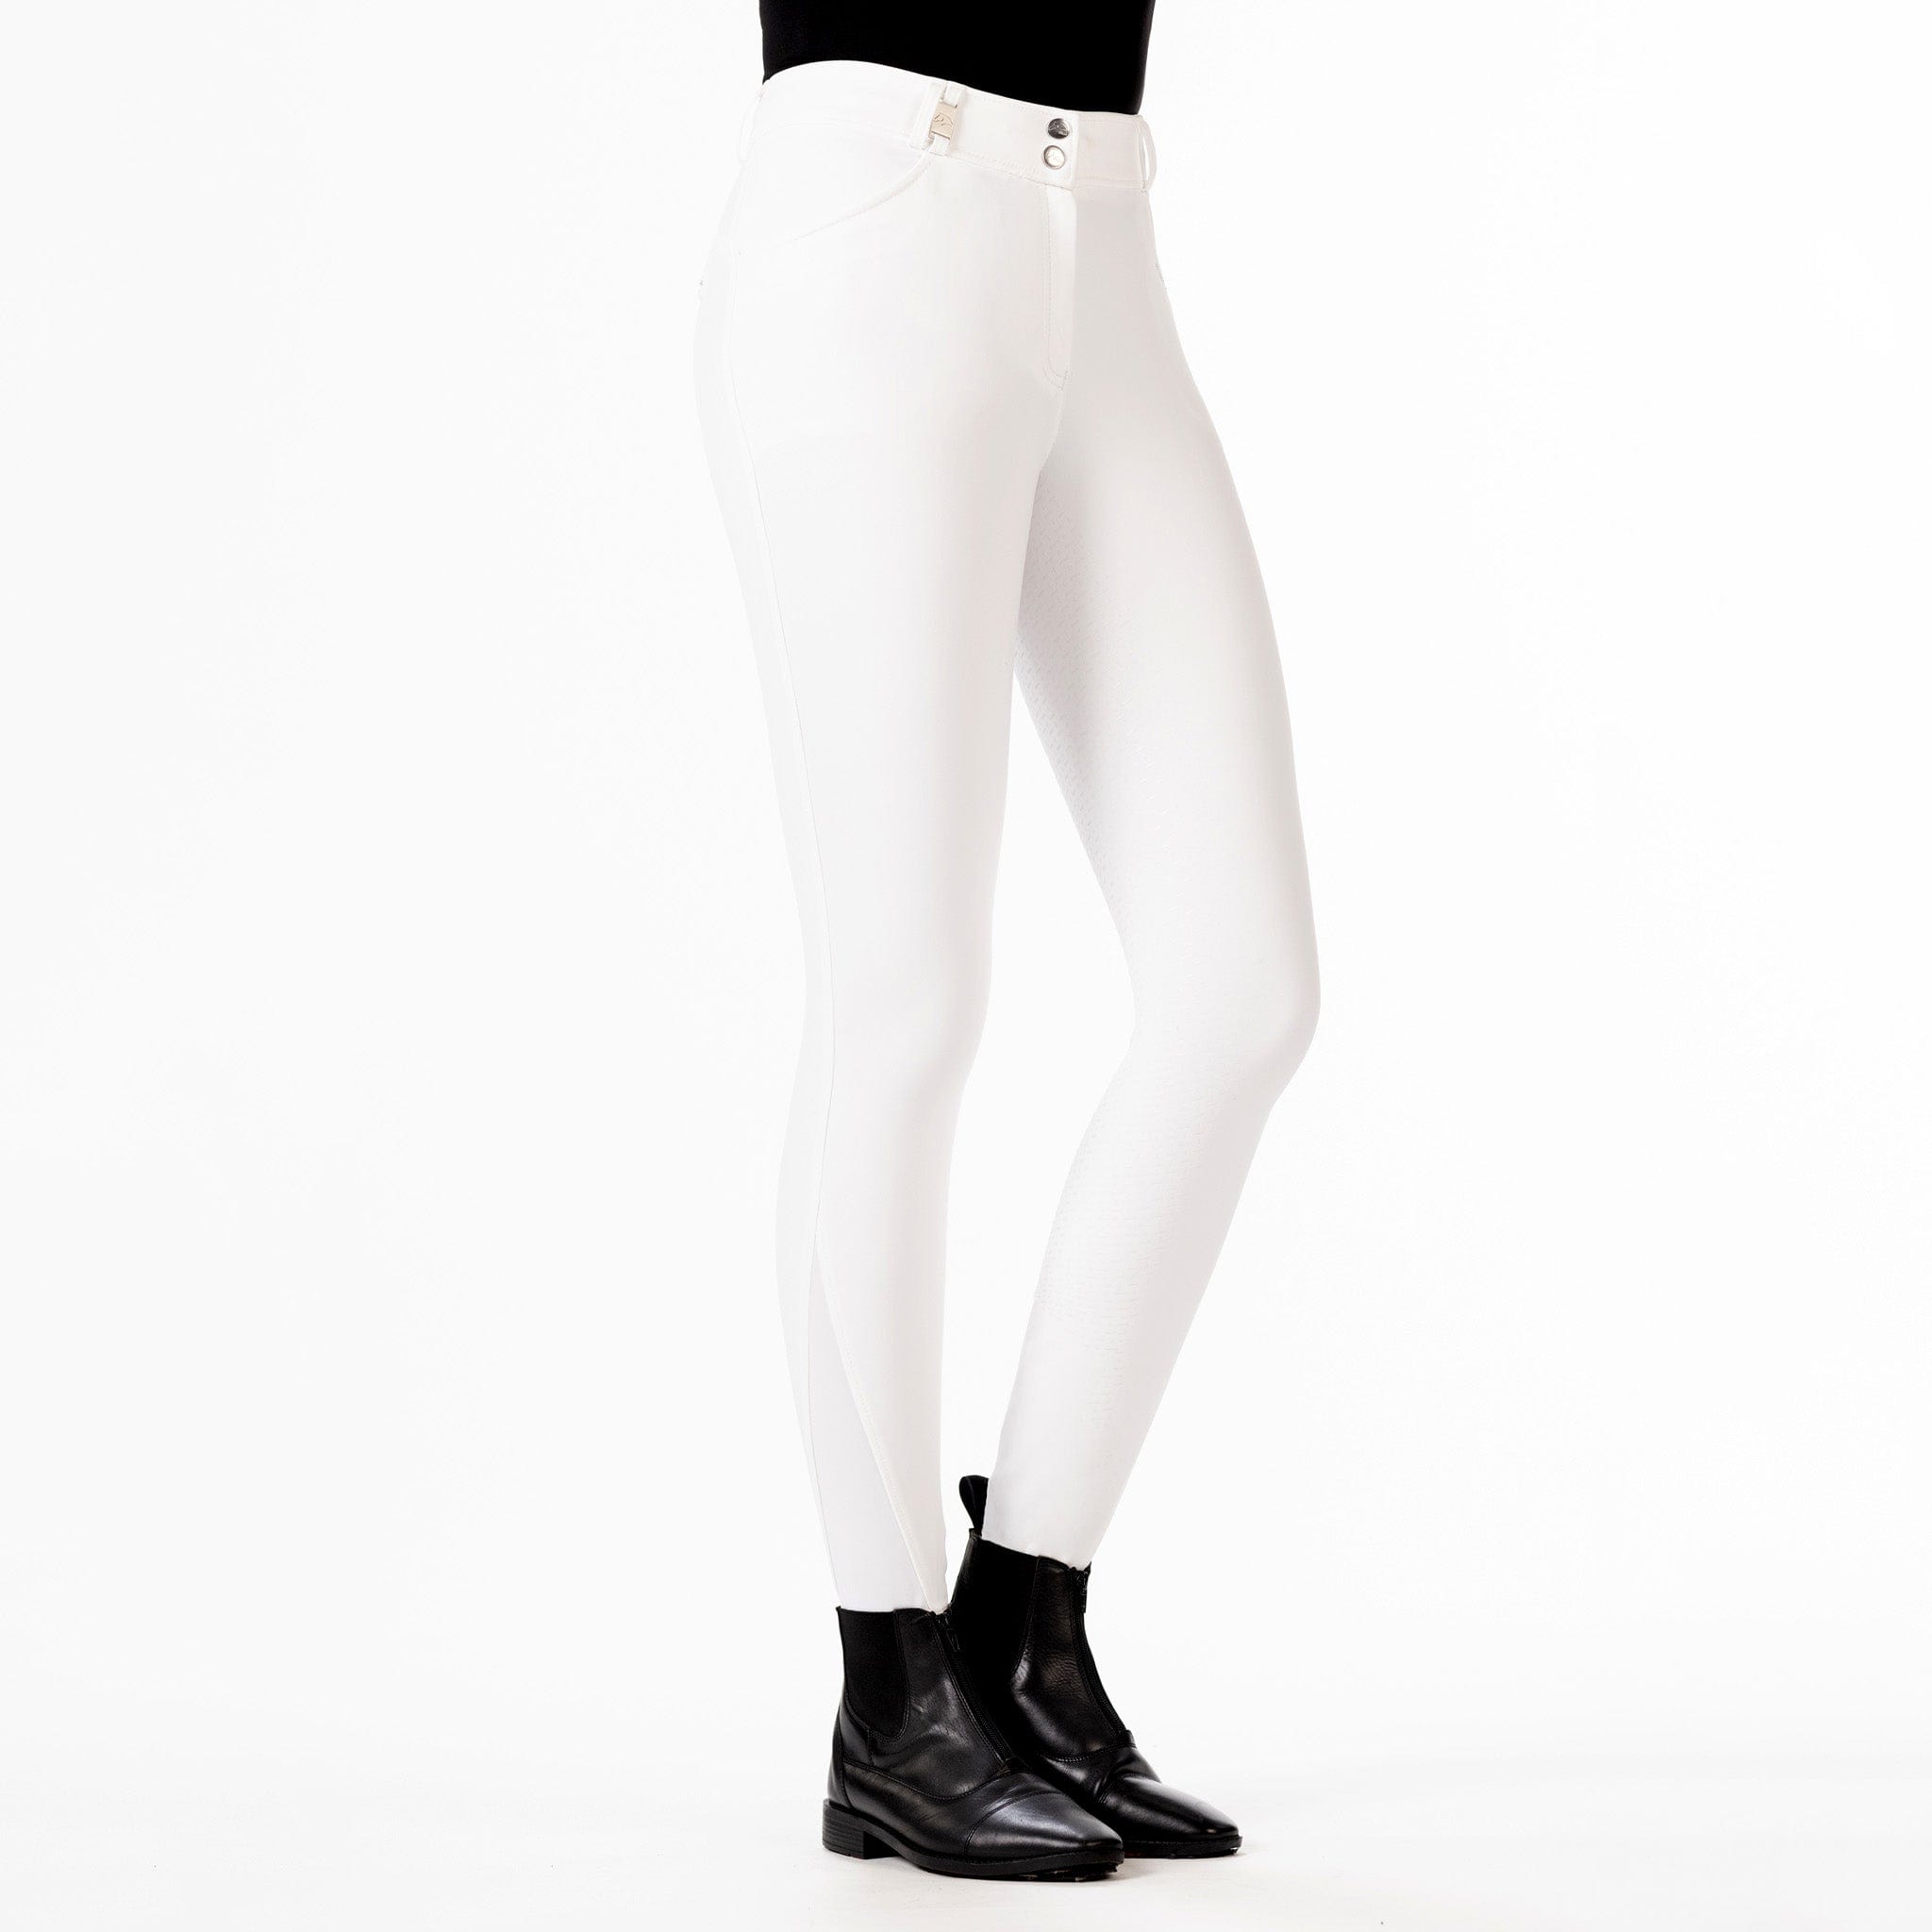 HKM Monaco Crystal Competition Silicone Full Seat Breeches 13226 White Front View On Model